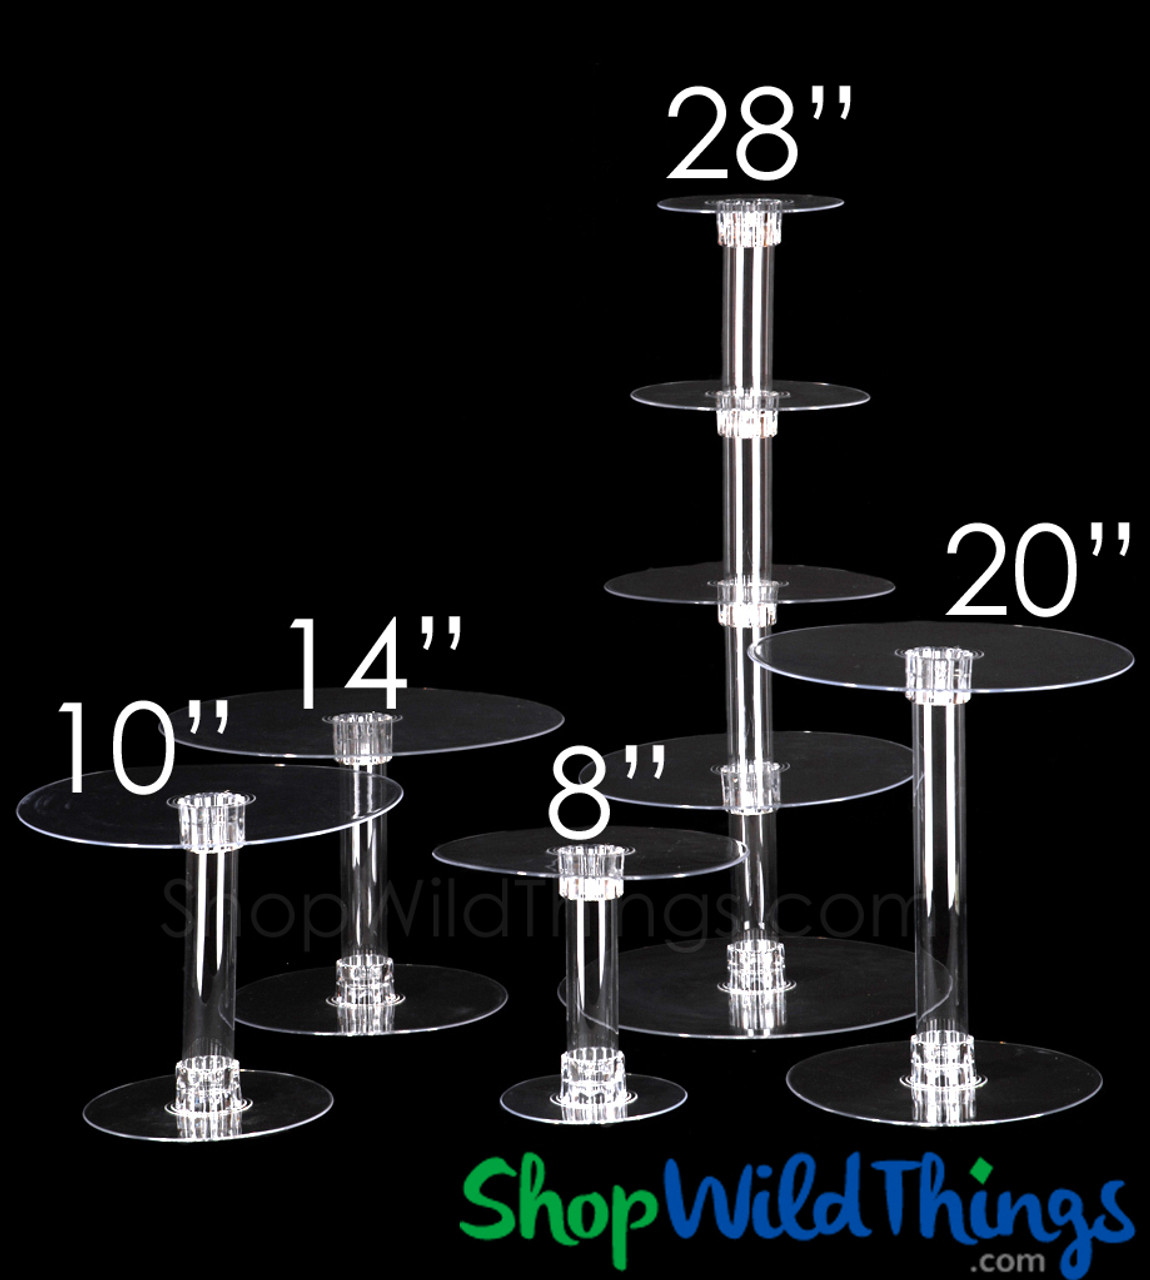 https://cdn11.bigcommerce.com/s-x1vm6a4952/images/stencil/1280x1280/products/10527/32441/dessert-stand-acrylic-elevation-20-tall-74__88141.1580507160.1280.1280__01875.1641249107.jpg?c=2